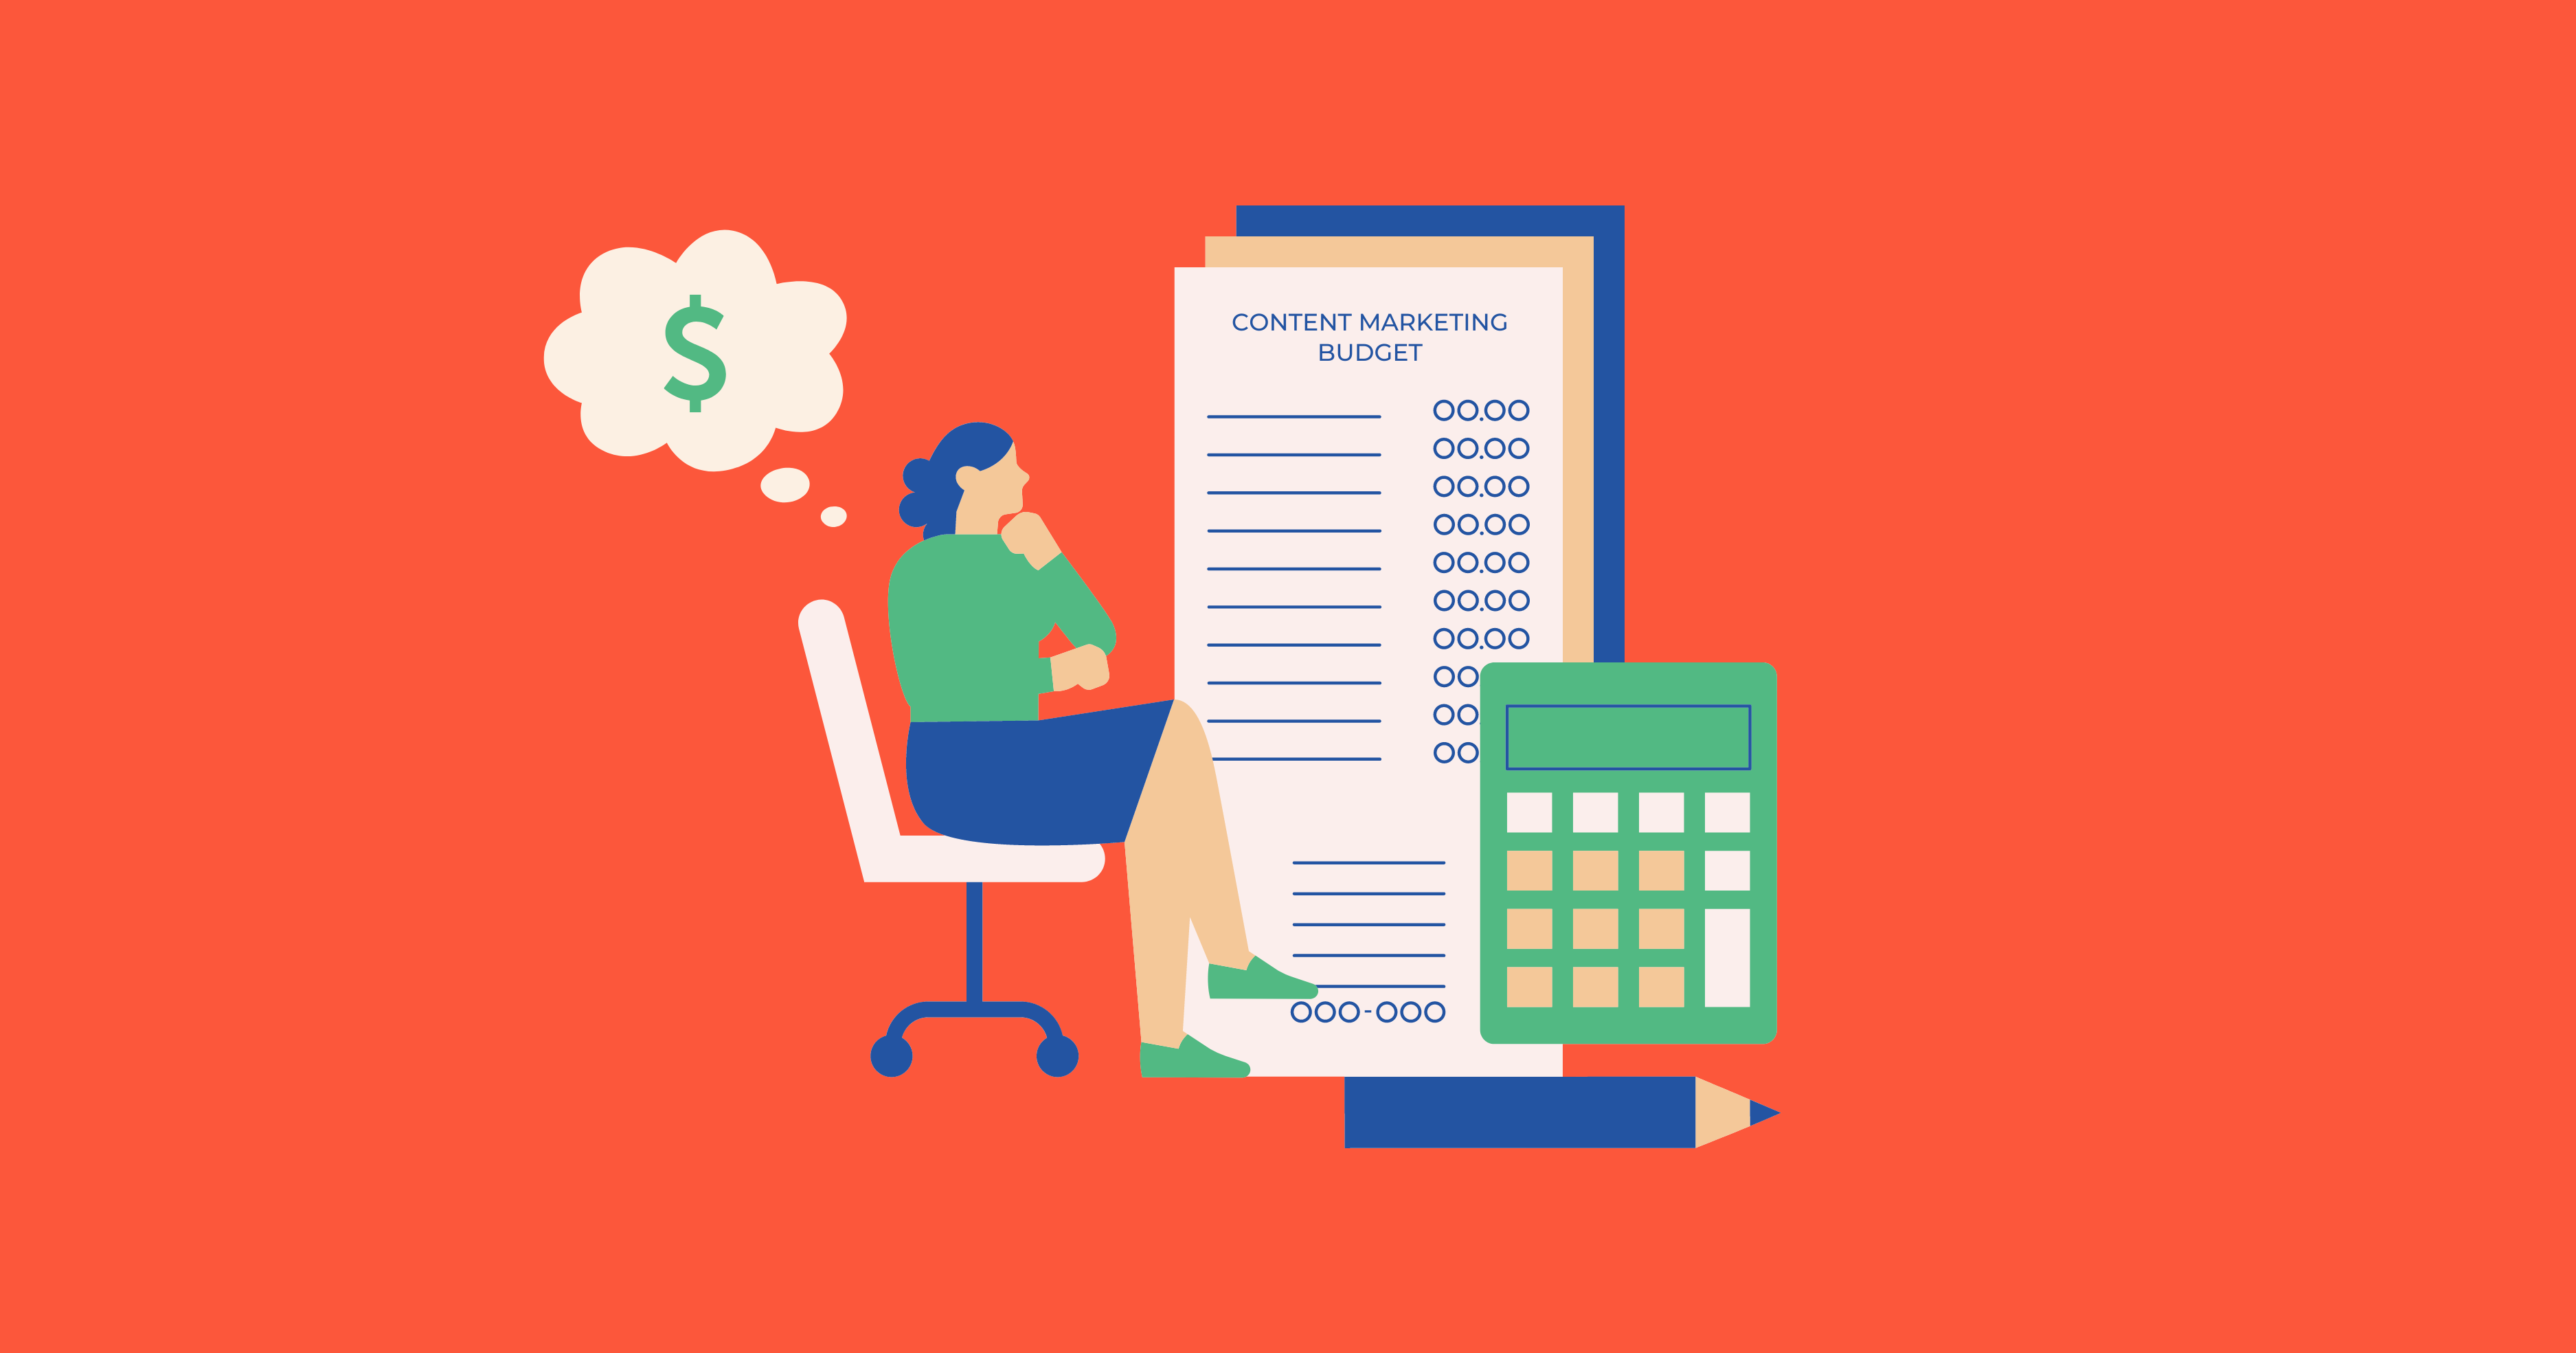 How Much Does Content Marketing Cost? A Full Breakdown